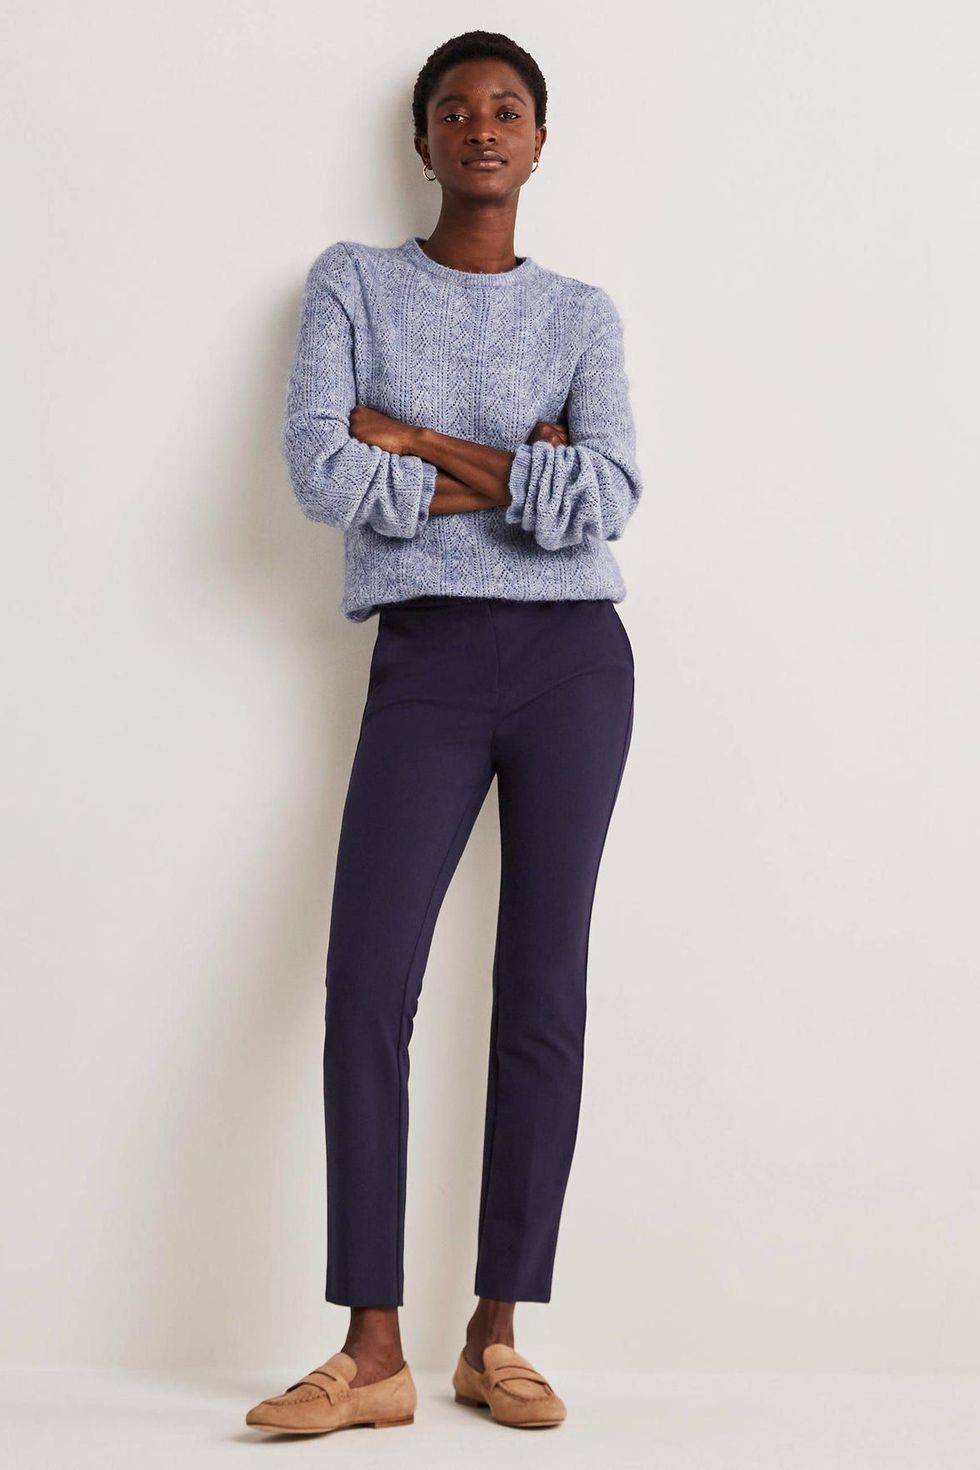 Side Stripe High Waisted Leggings, M&S Collection